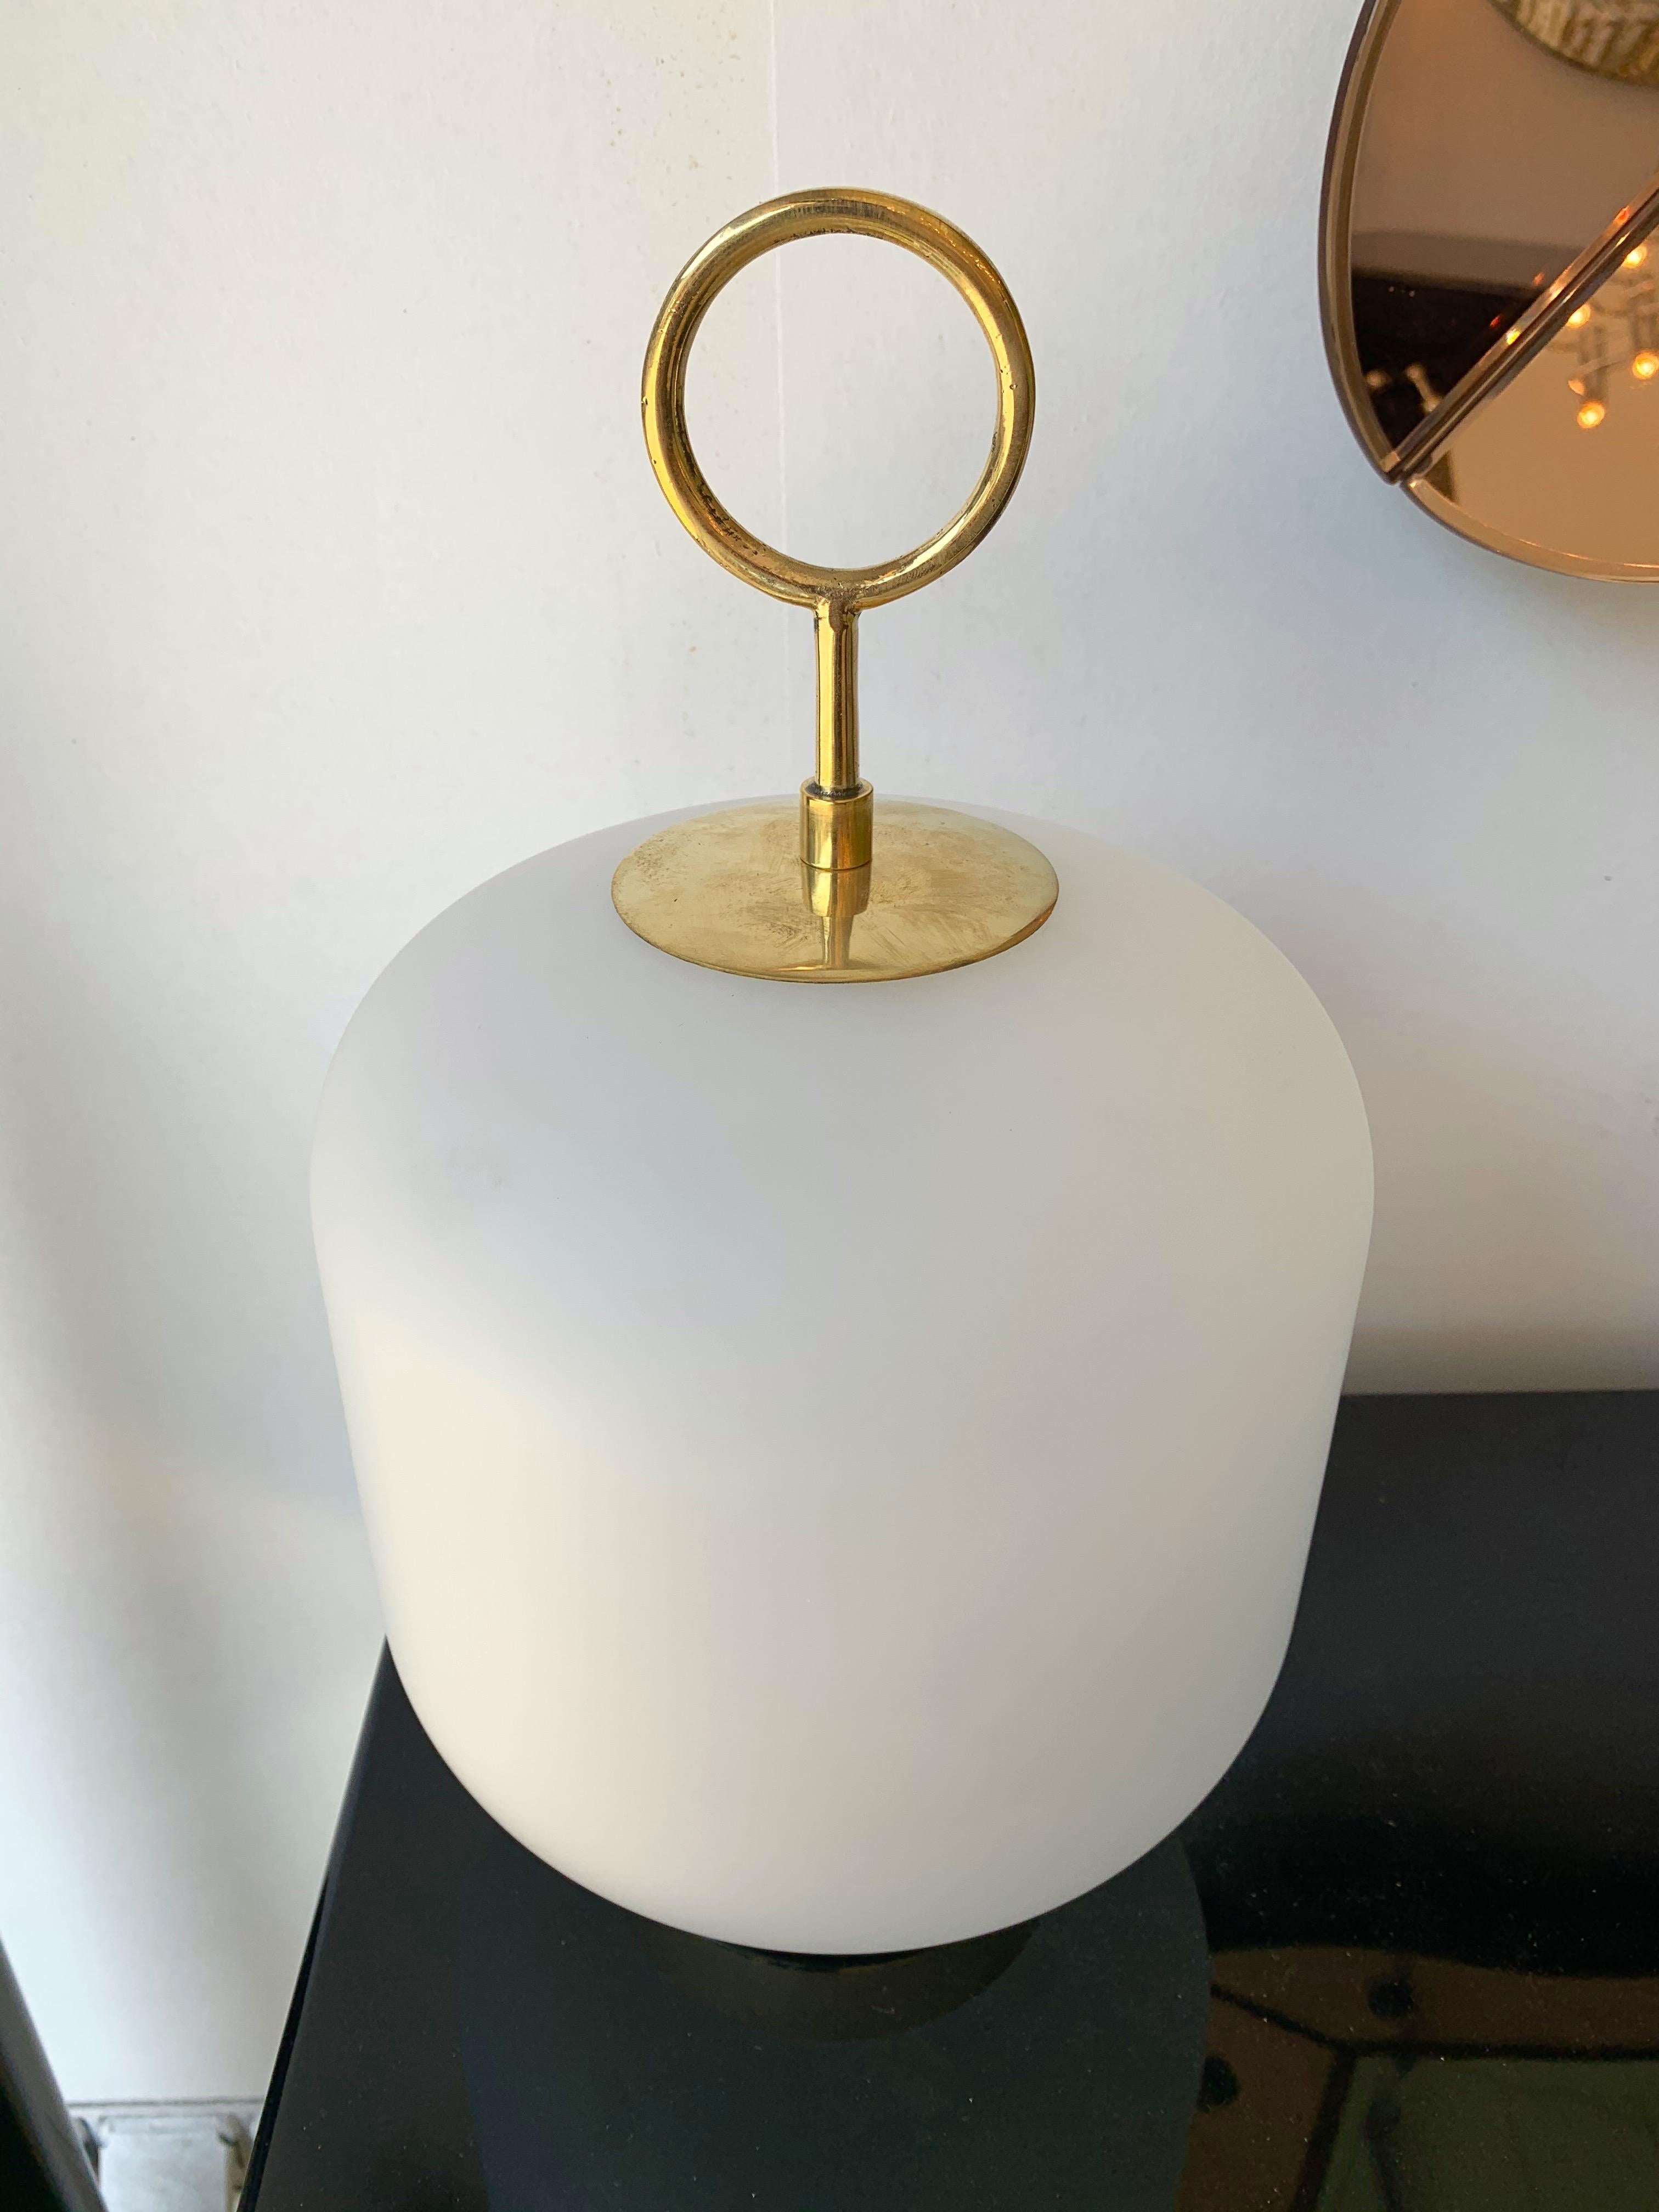 Pair of medium size of the can lamp model, Murano glass and brass. Exist in 3 size. Small artisanal production from Murano. In the style inspiration period of Jean Royere, Stilnovo, Arteluce.